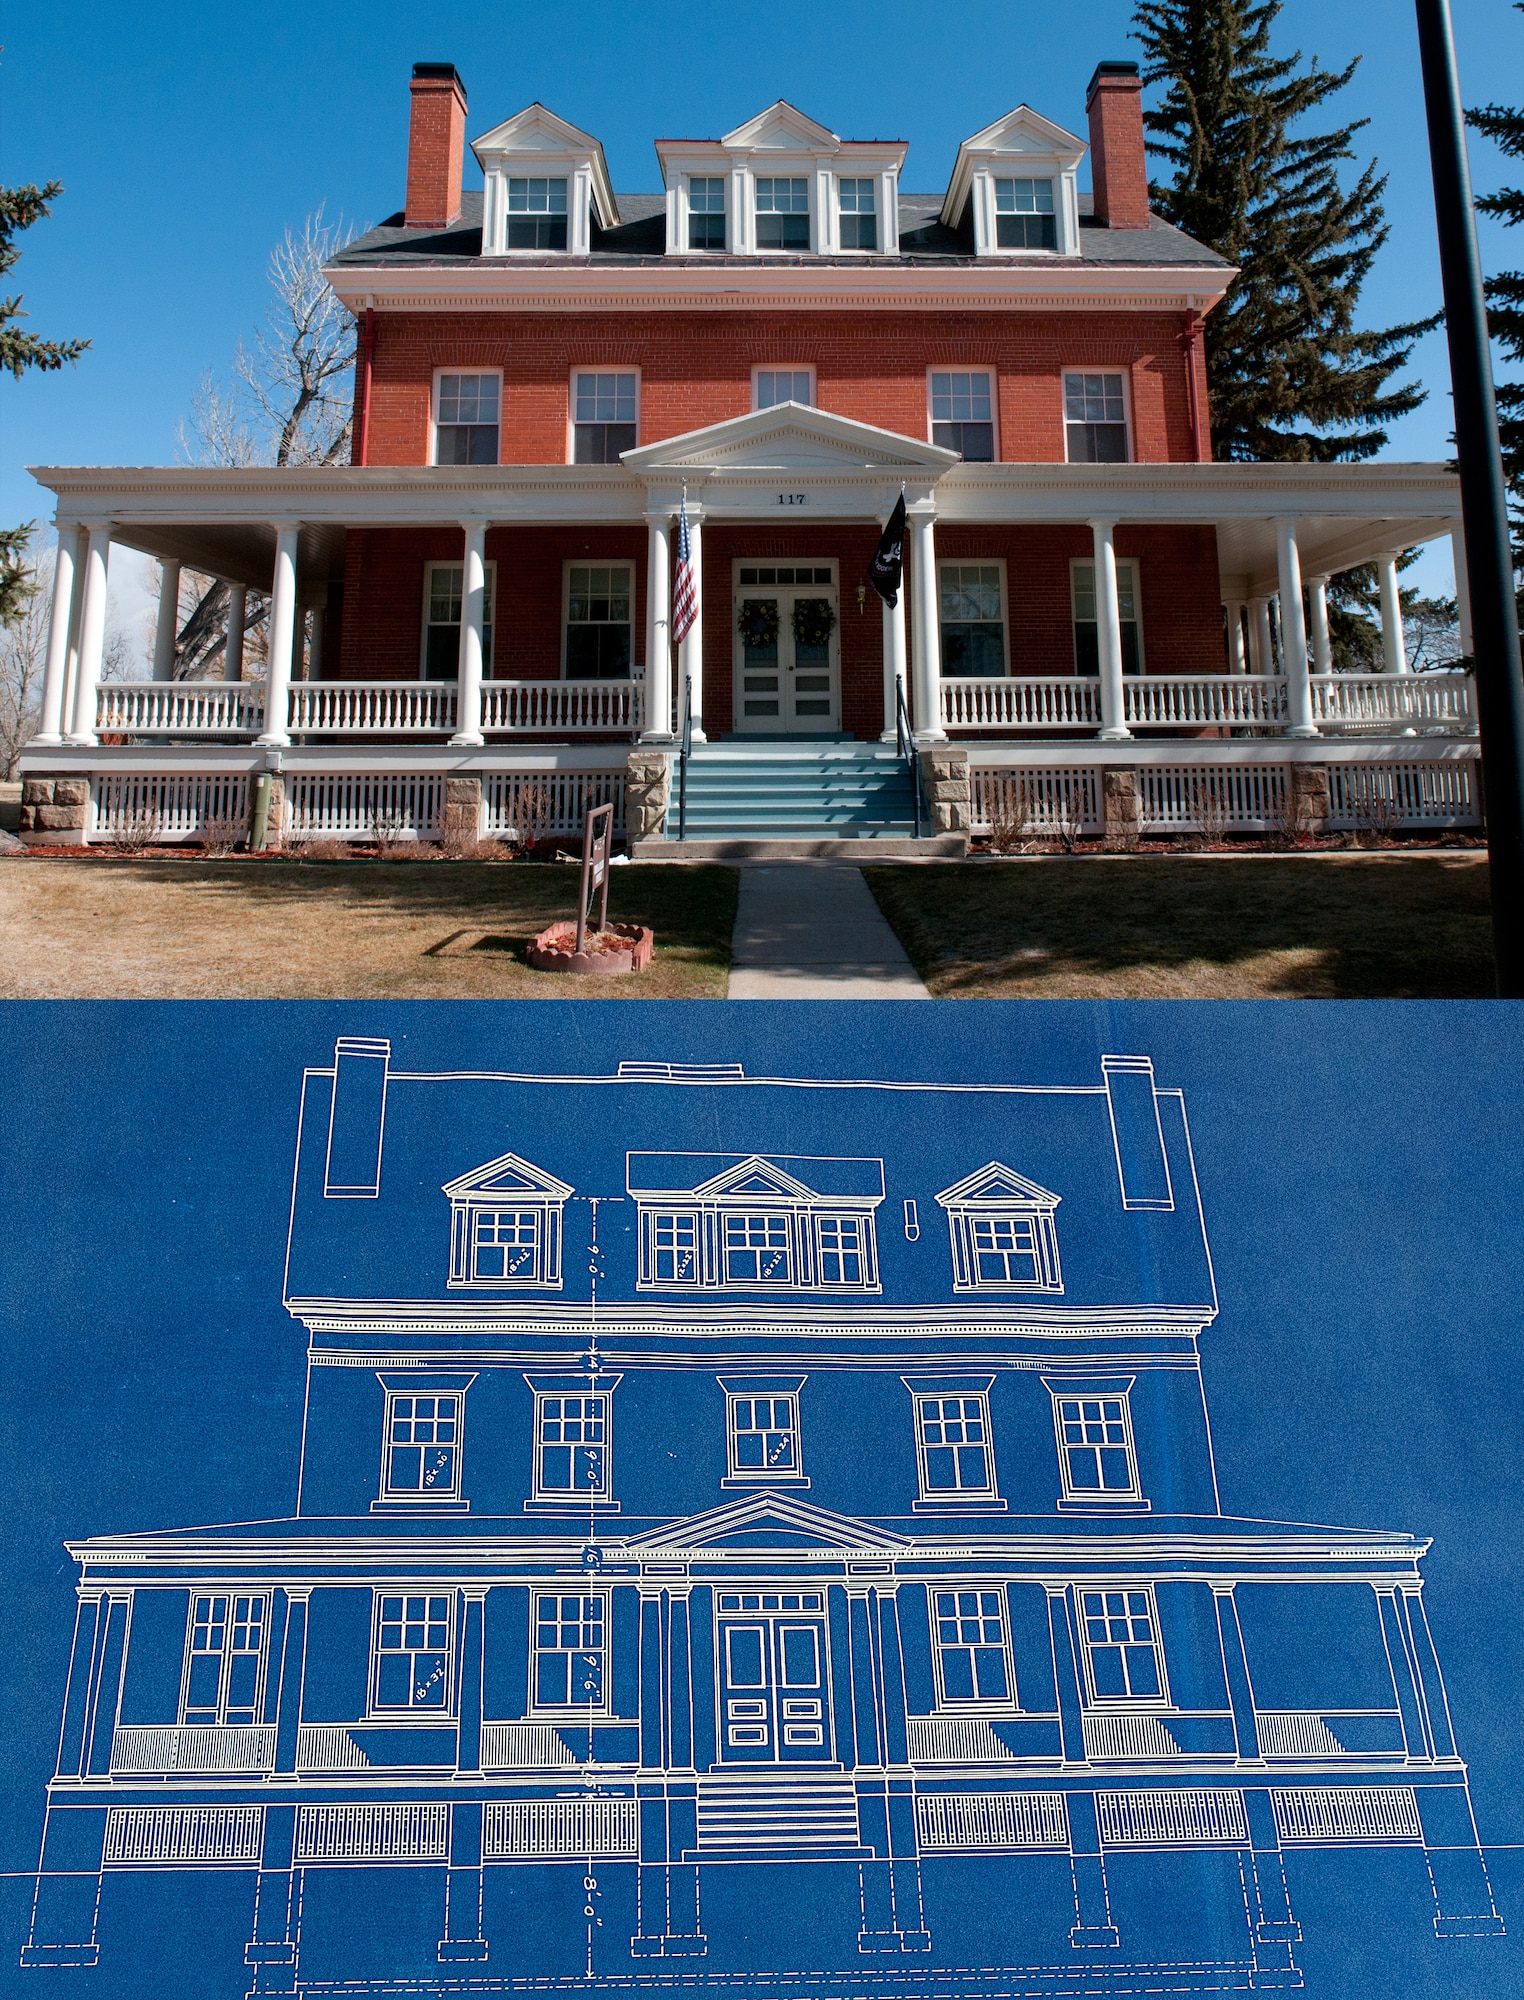 This composite illustration compares the original 1908 blueprint for the commanding officer’s quarters with how the structure, which is the home of the 90th Missile Wing commander, looks today. The original blueprint is among the thousands of historical documents and artifacts stored in the F. E. Warren Air Force Base curation facility. (U.S. Air Force photo illustration by R.J. Oriez)